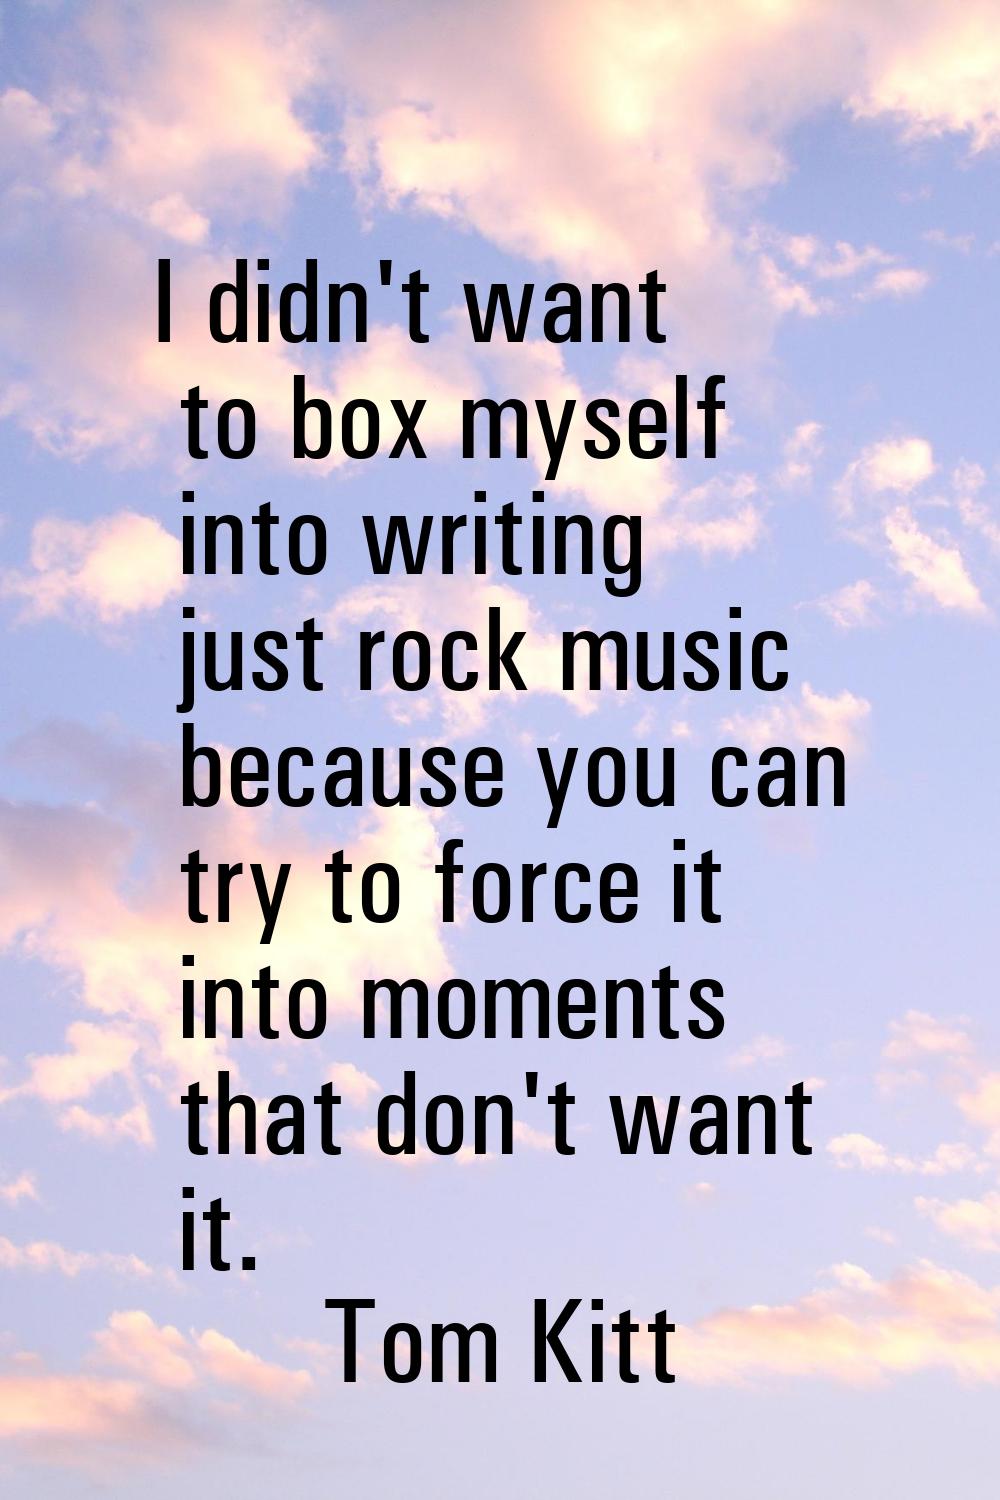 I didn't want to box myself into writing just rock music because you can try to force it into momen